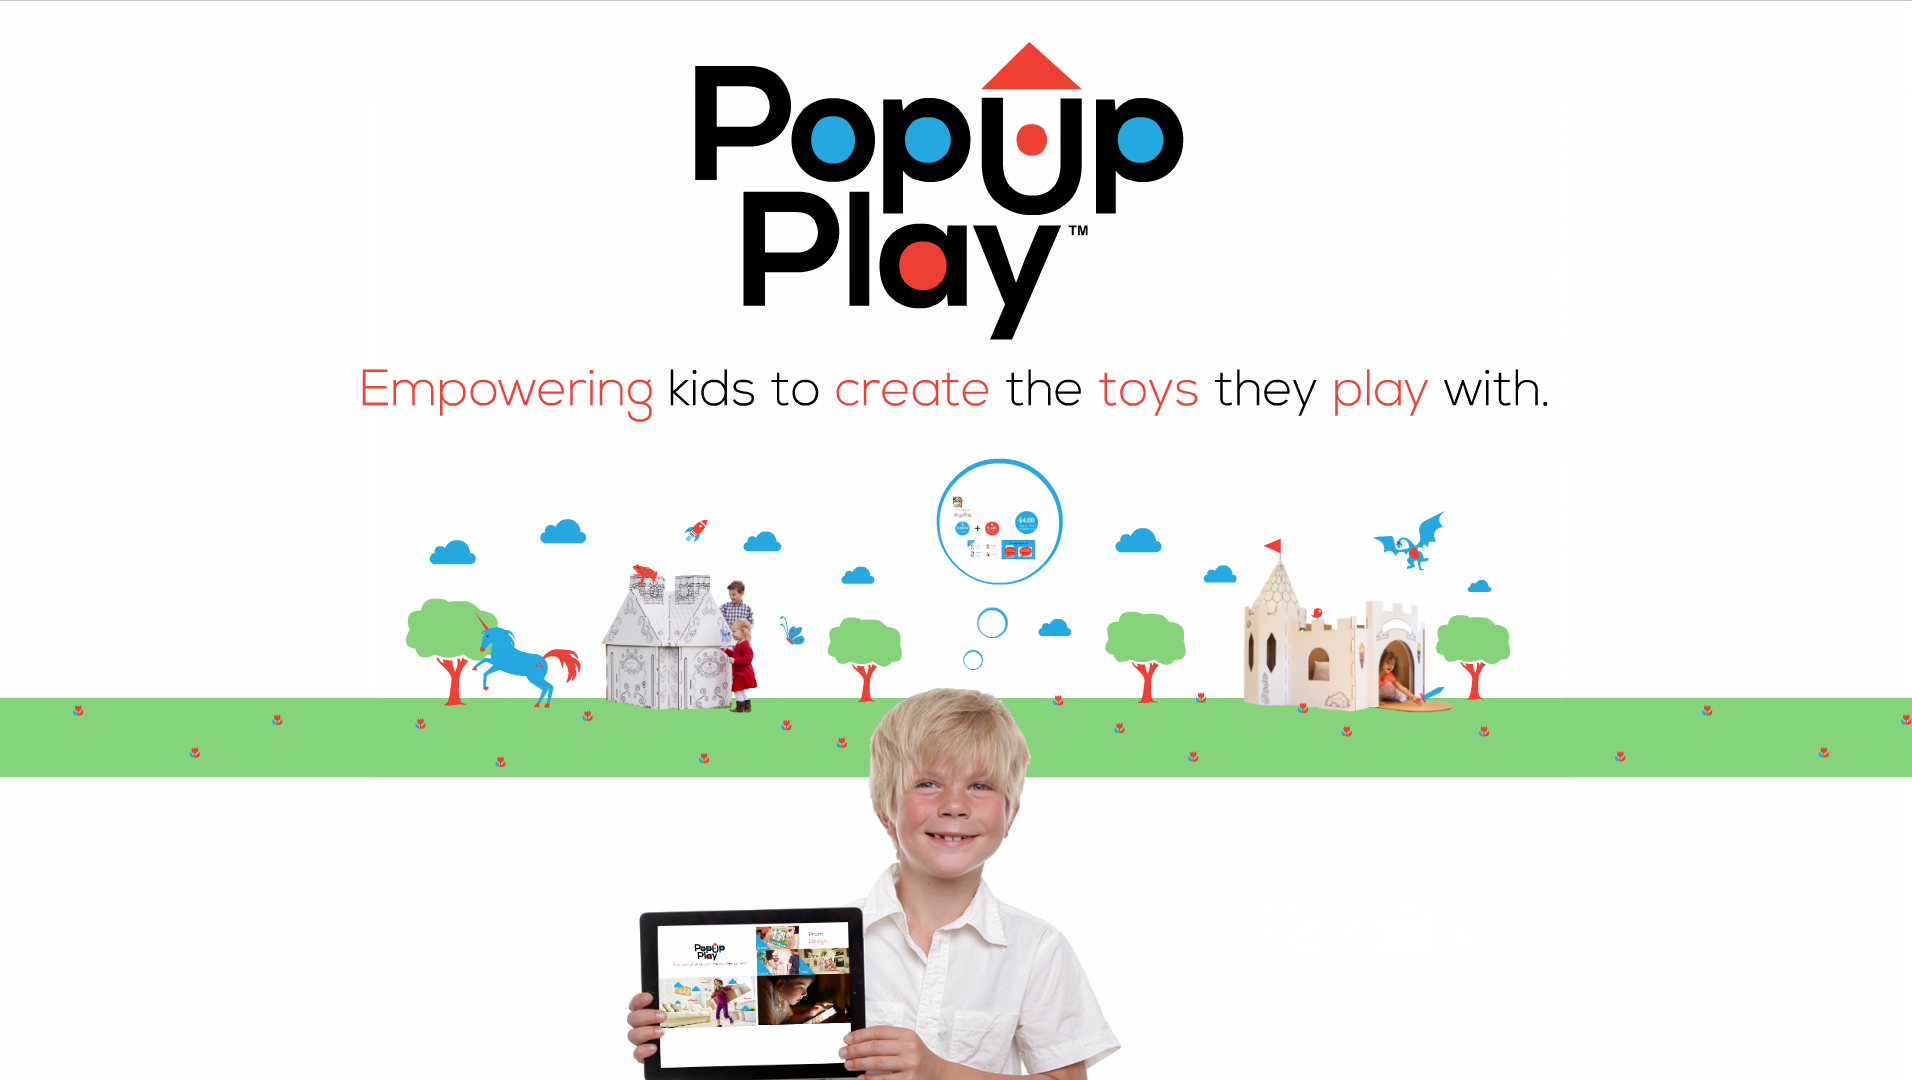 Screenshot from PopUp Play